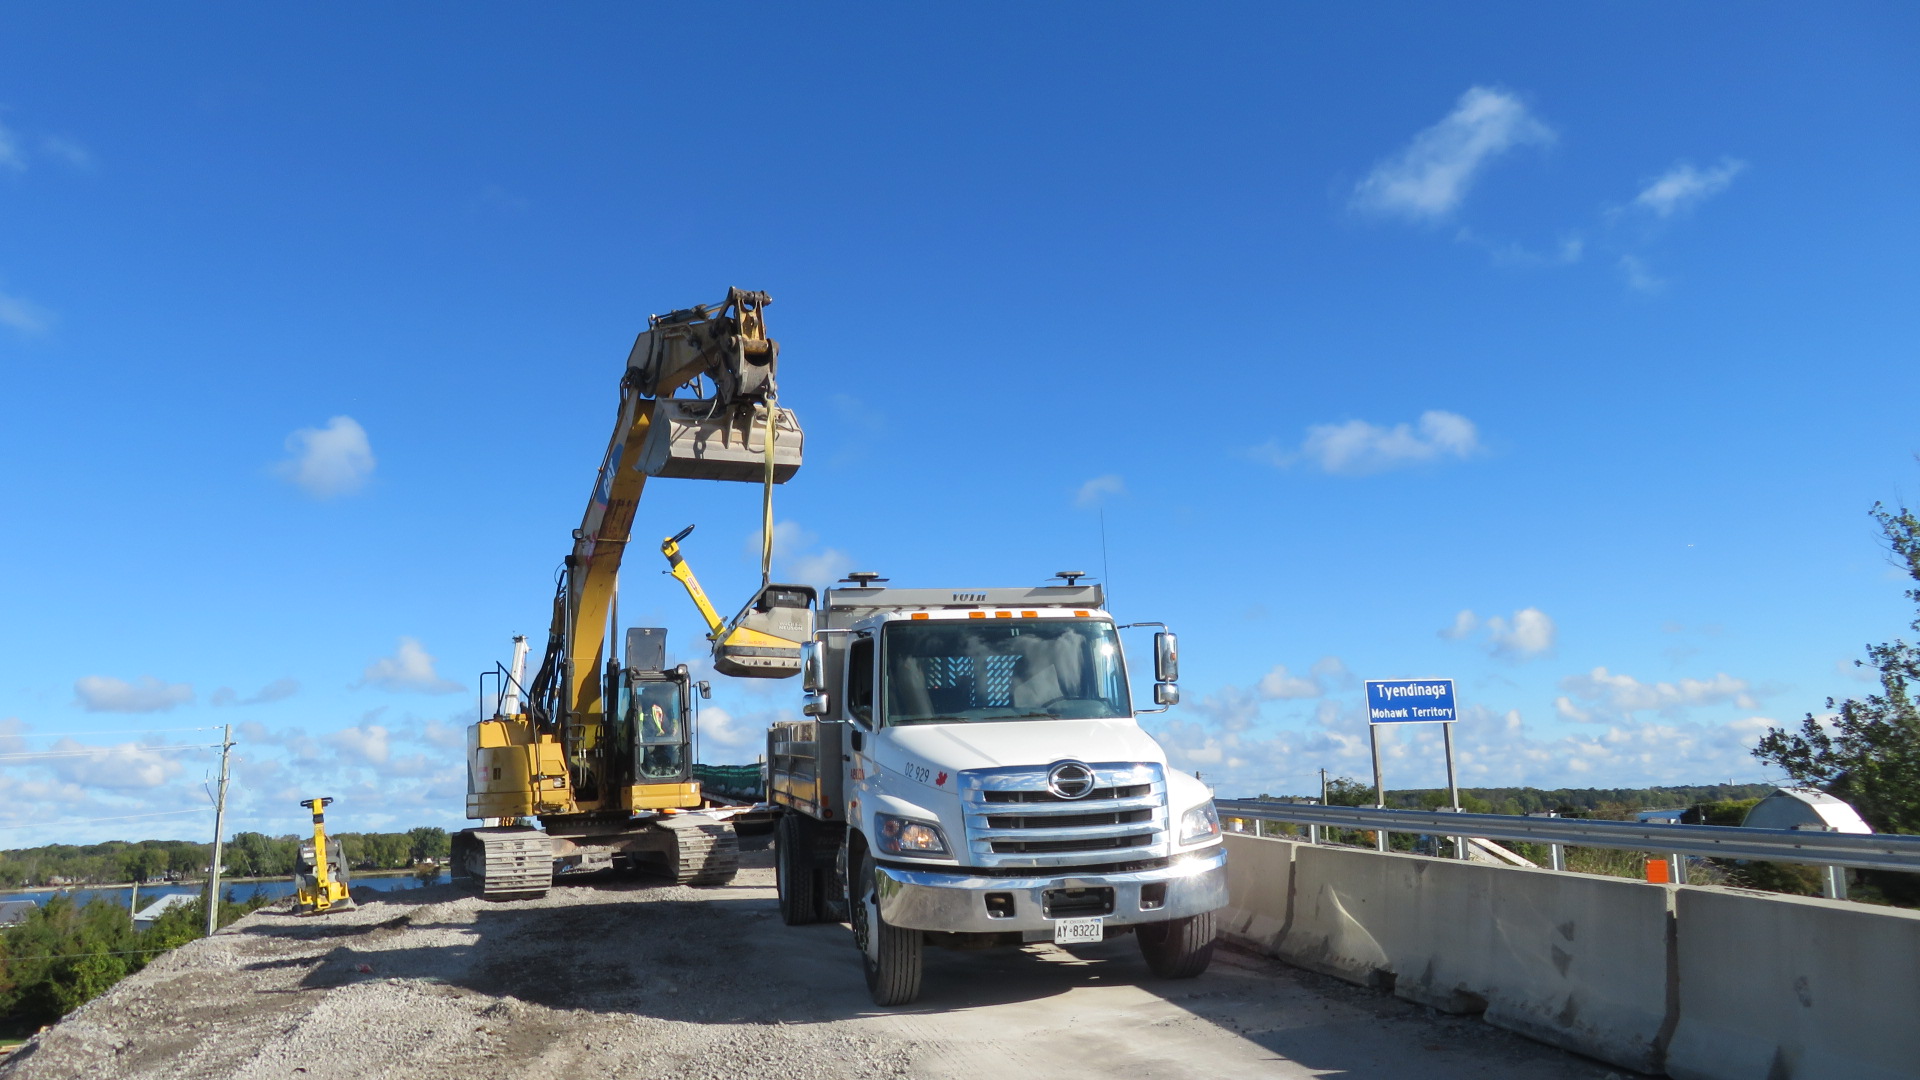 Using the excavator to lift the tamping machine to the truck